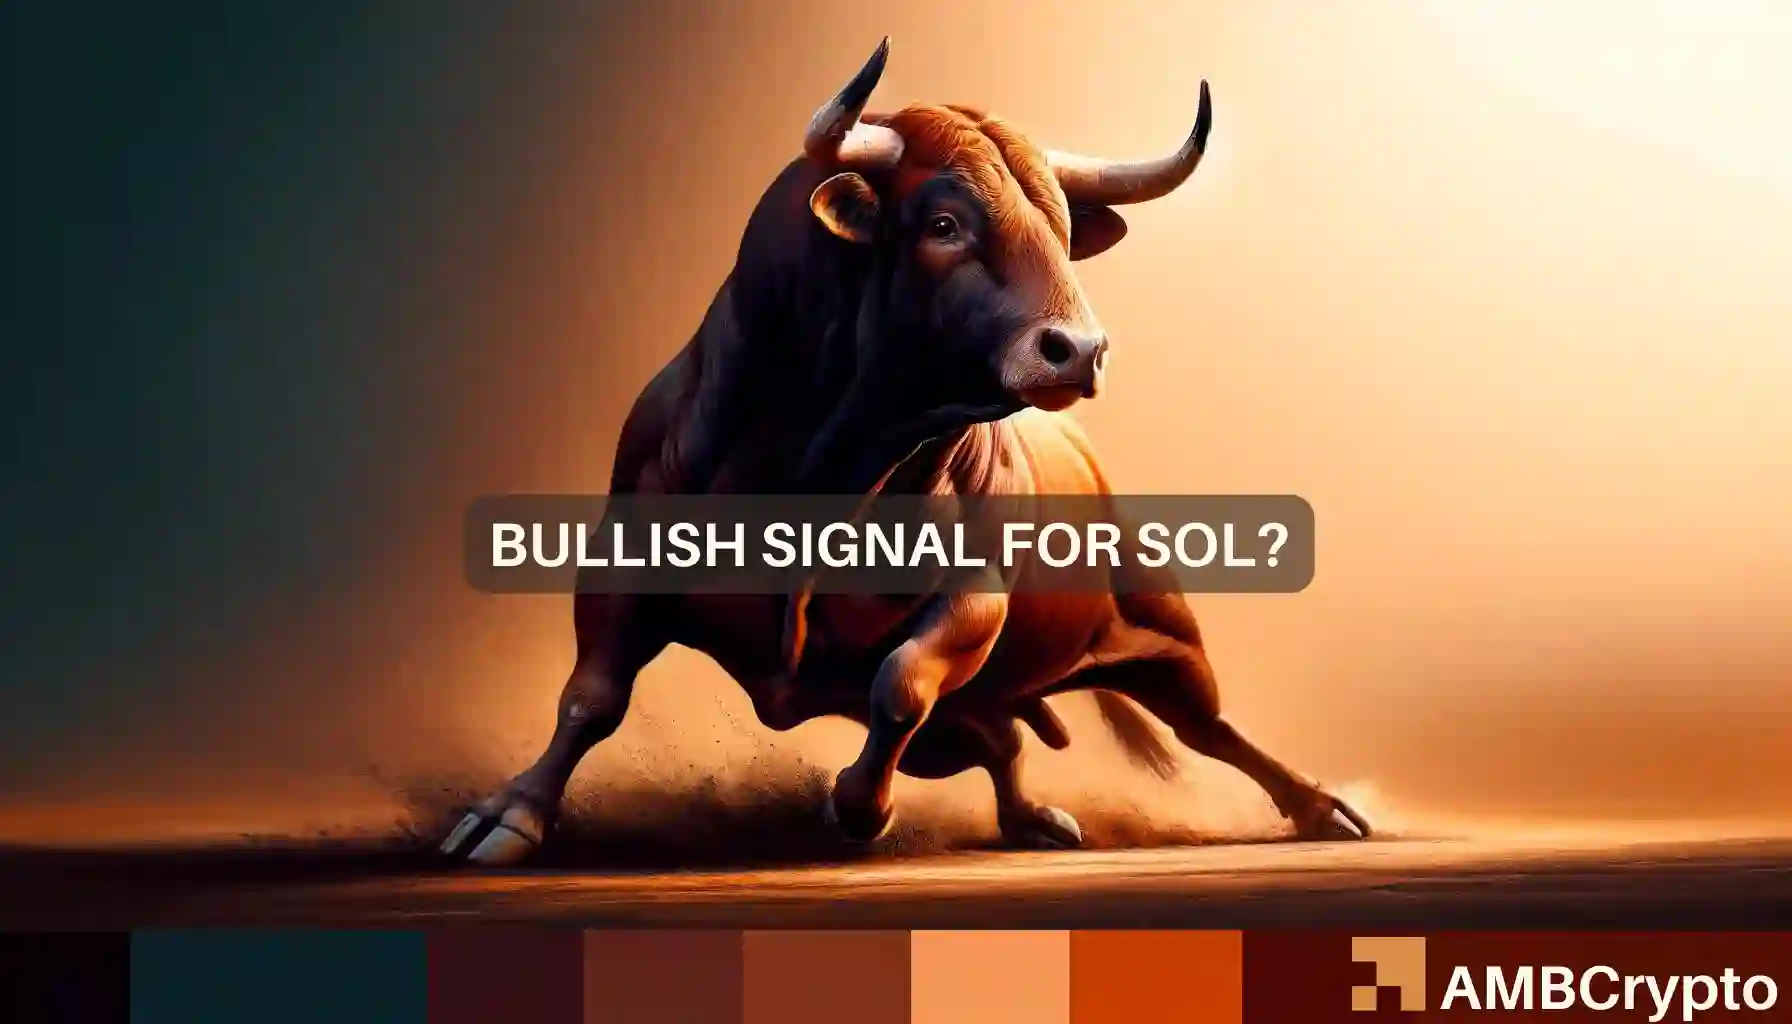 Bullish signal for SOL after new release